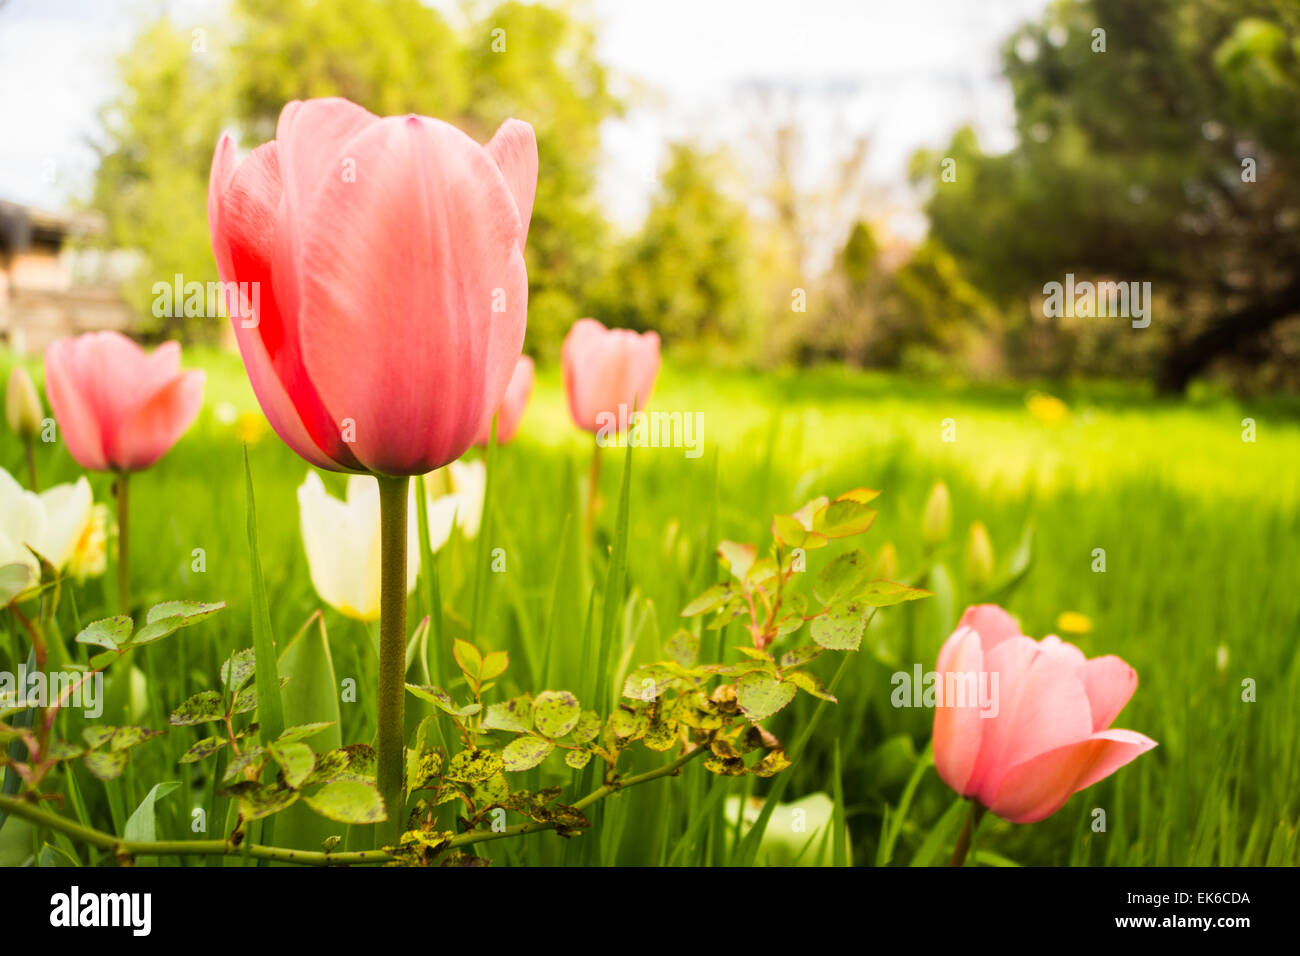 Wild tulips in an overgrown grassy field with flowers. Stock Photo